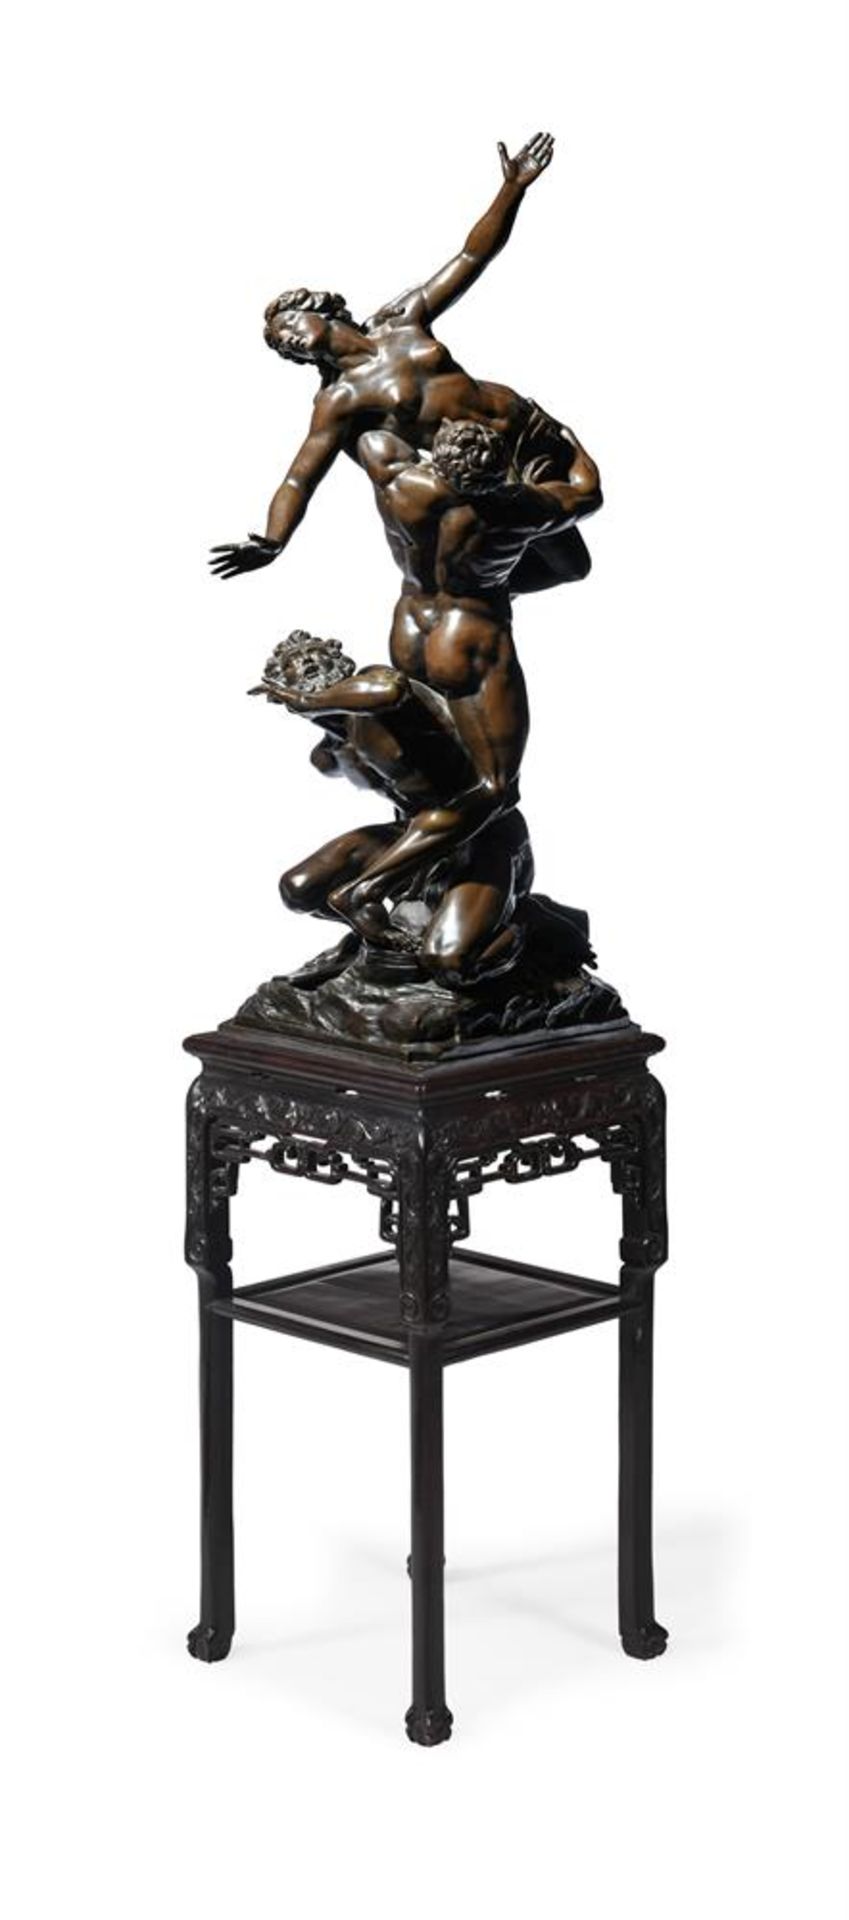 AFTER GIAMBOLOGNA (ITALIAN, 1529-1608), A LARGE BRONZE GROUP 'ABDUCTION OF THE SABINE WOMEN'